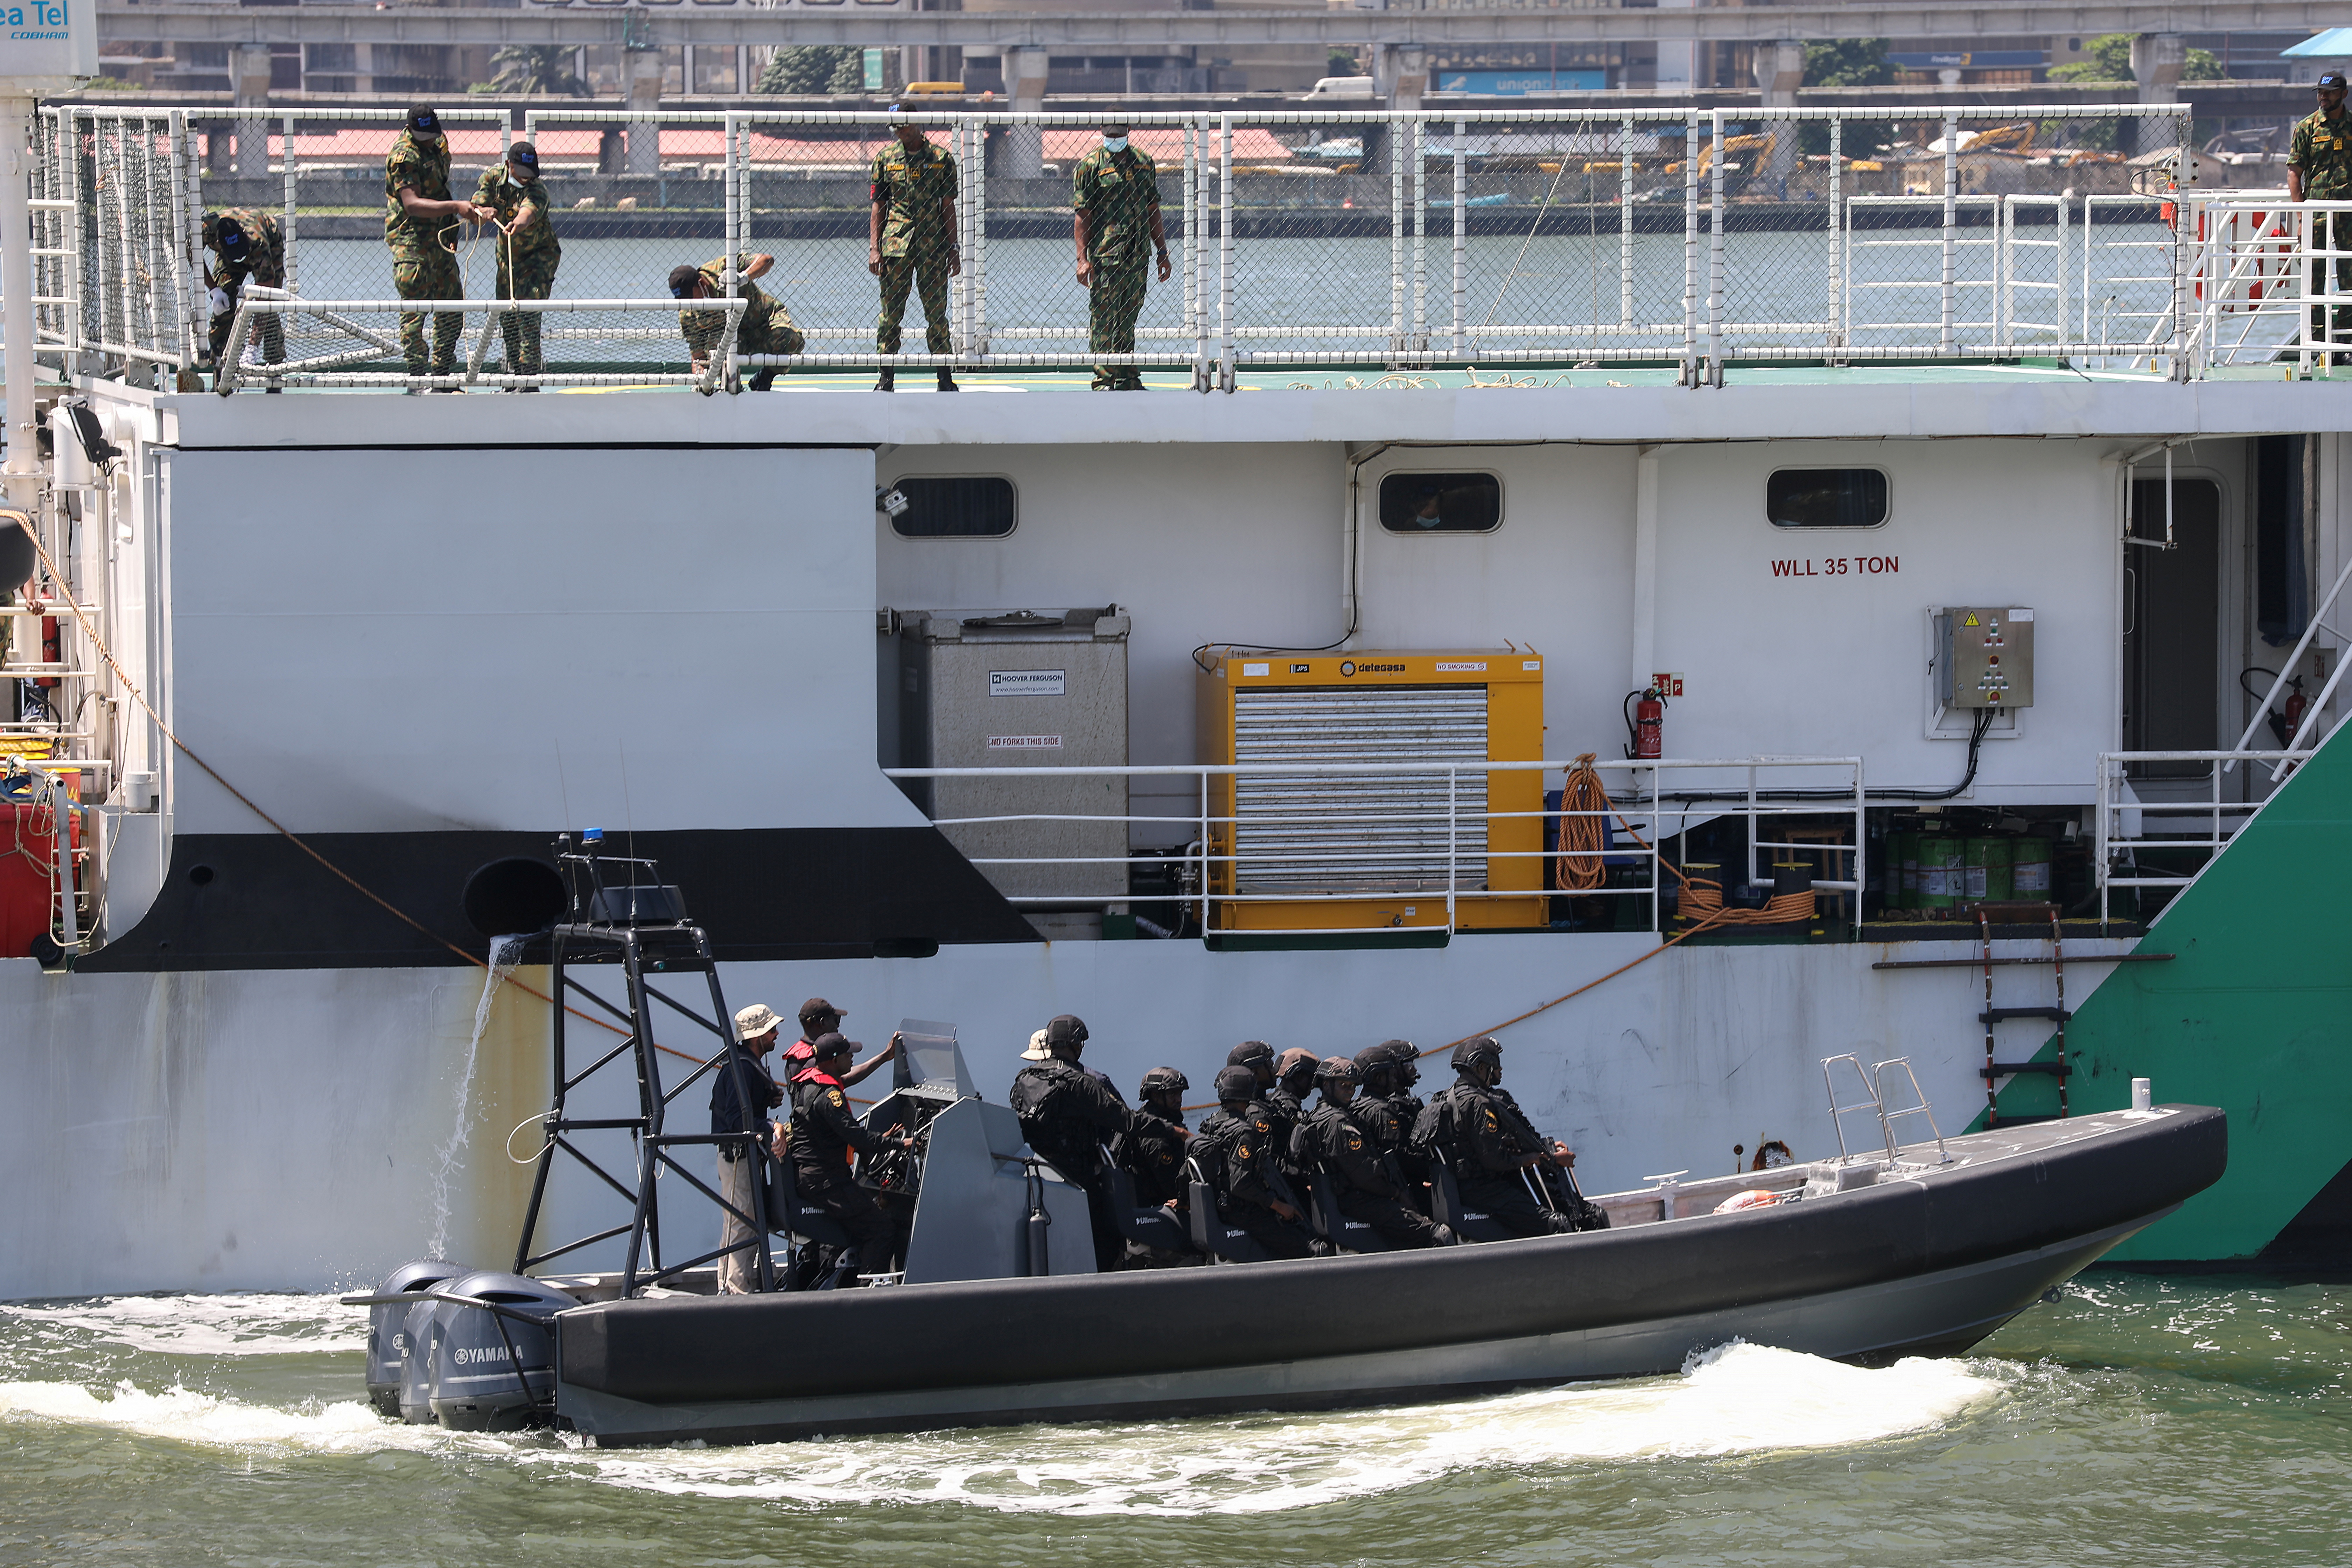 Members of the Maritime Security Unit prepare to board a vessel as they stage an anti-piracy drill during the launch of the Deep Blue project by the Nigerian government in Apapa, Lagos,